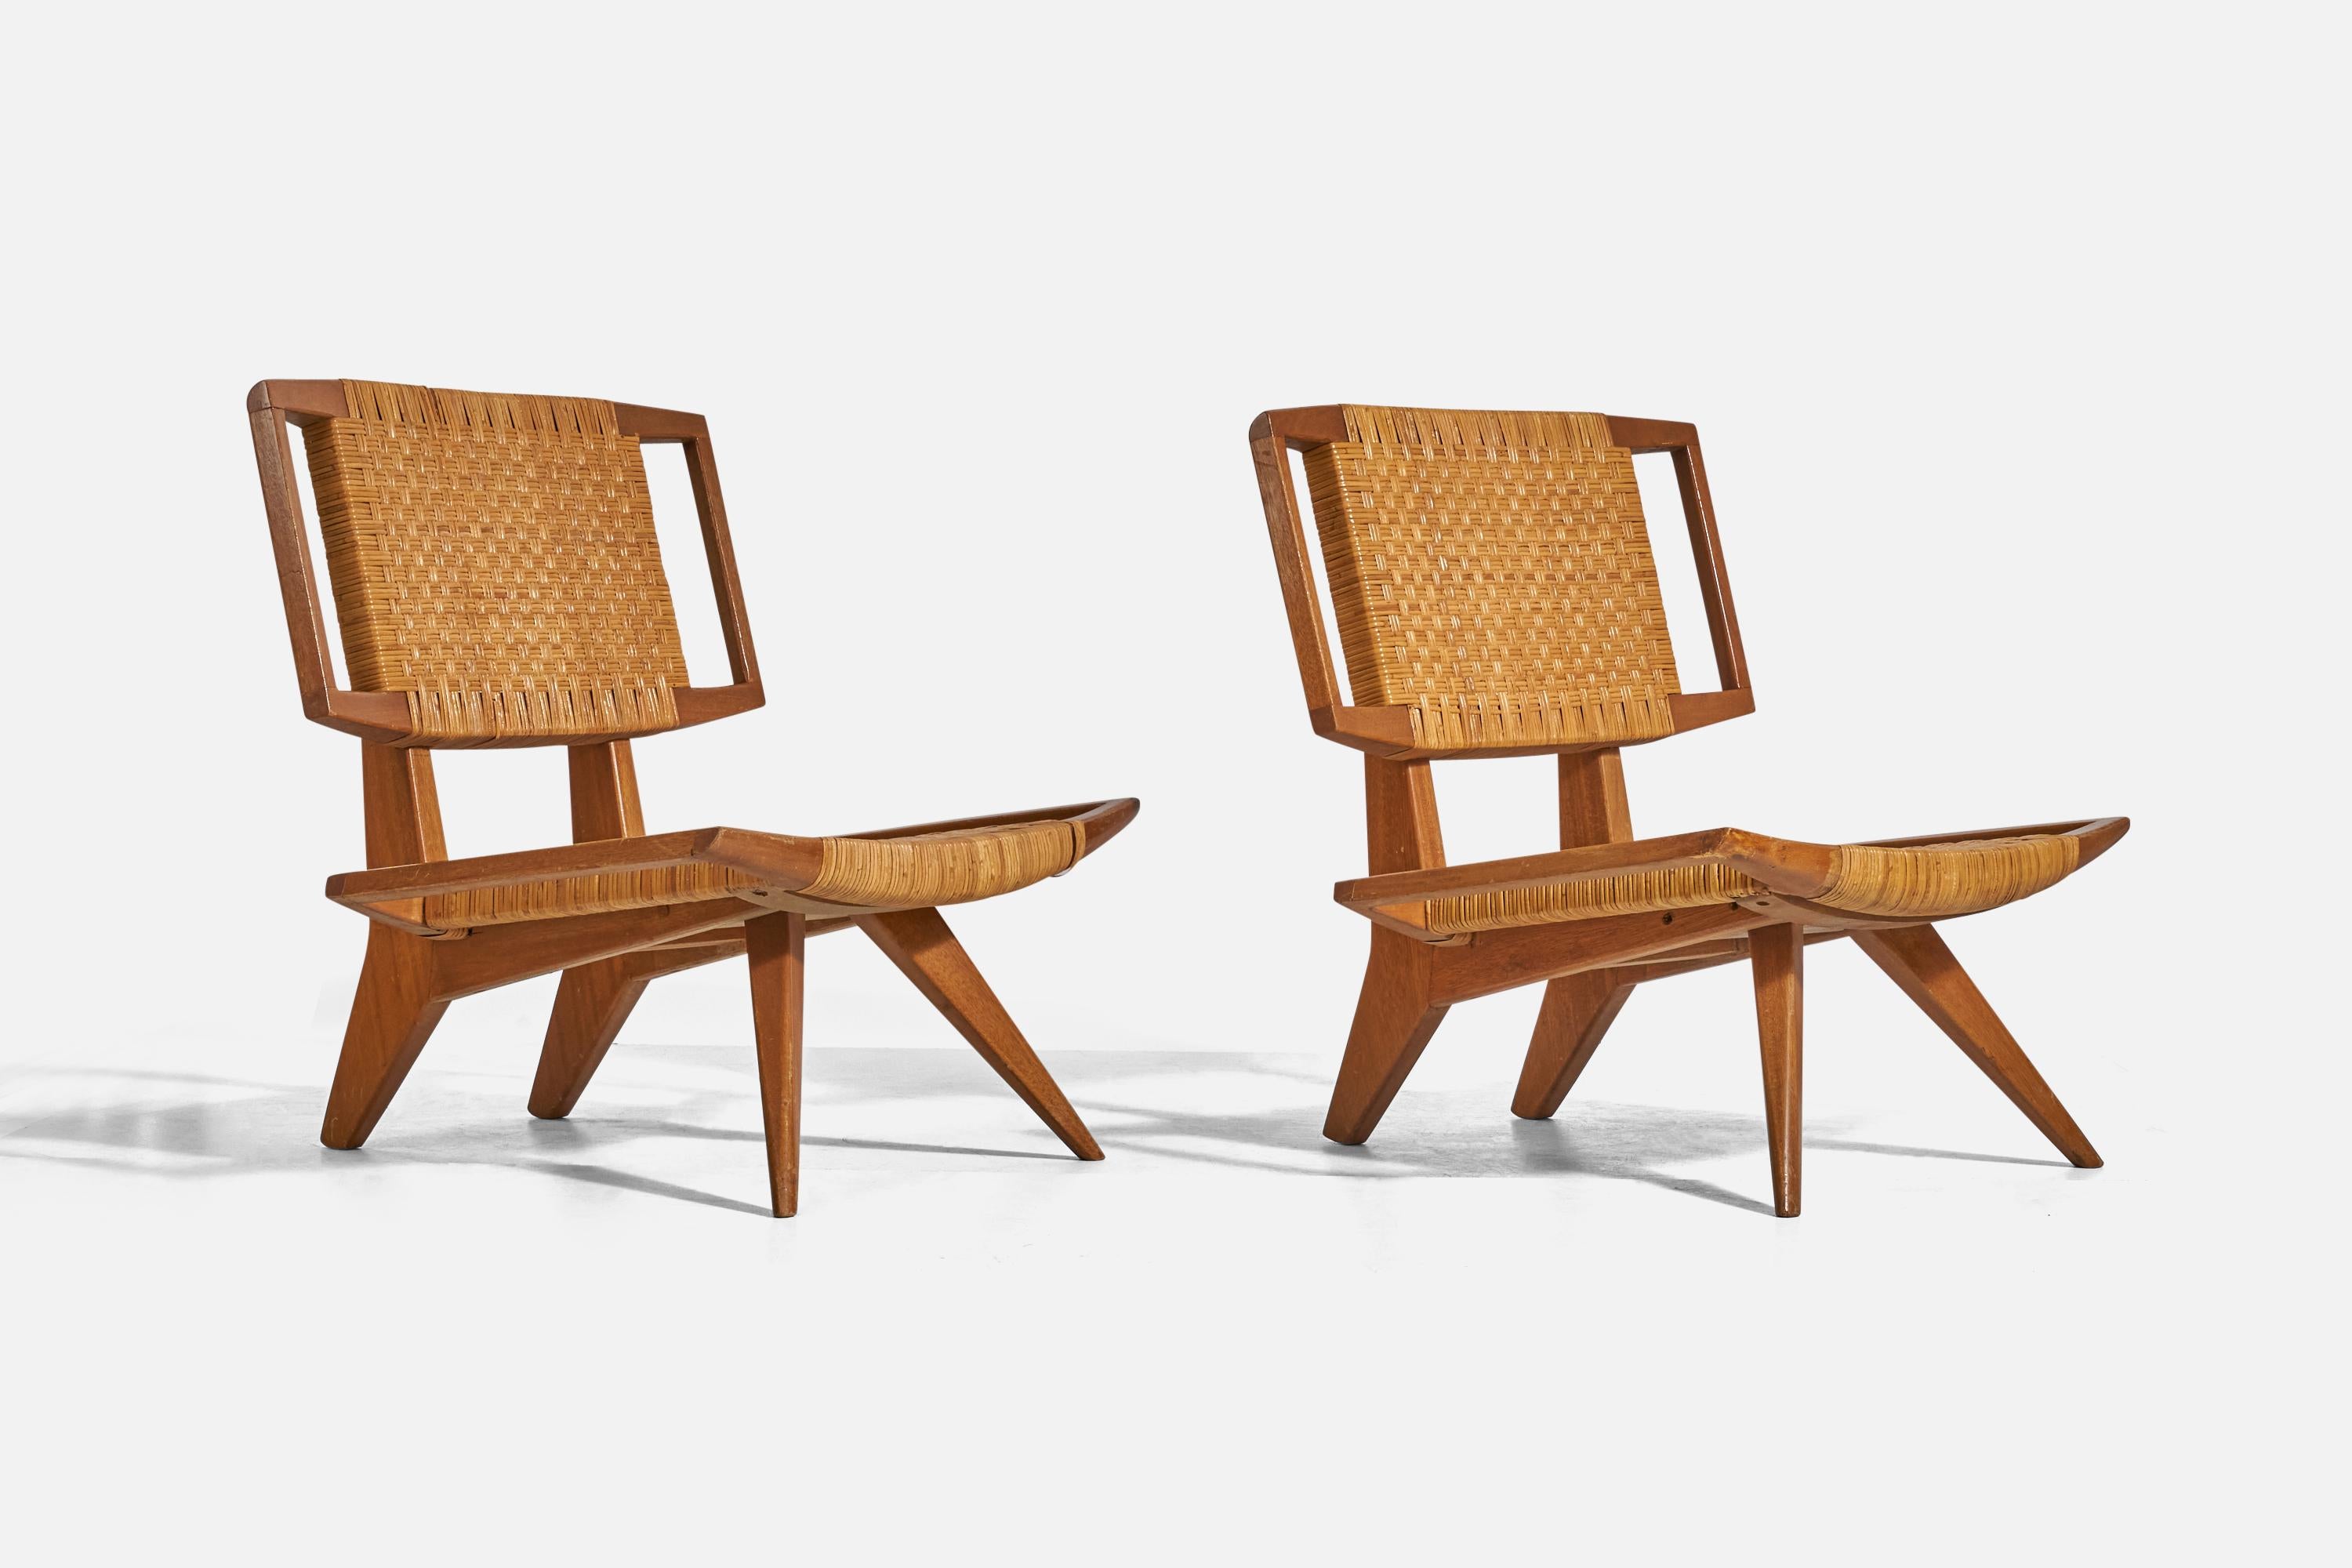 A pair of rattan and mahogany lounge chairs designed by Paul László and produced by Glenn of California, United States, 1950s. 

